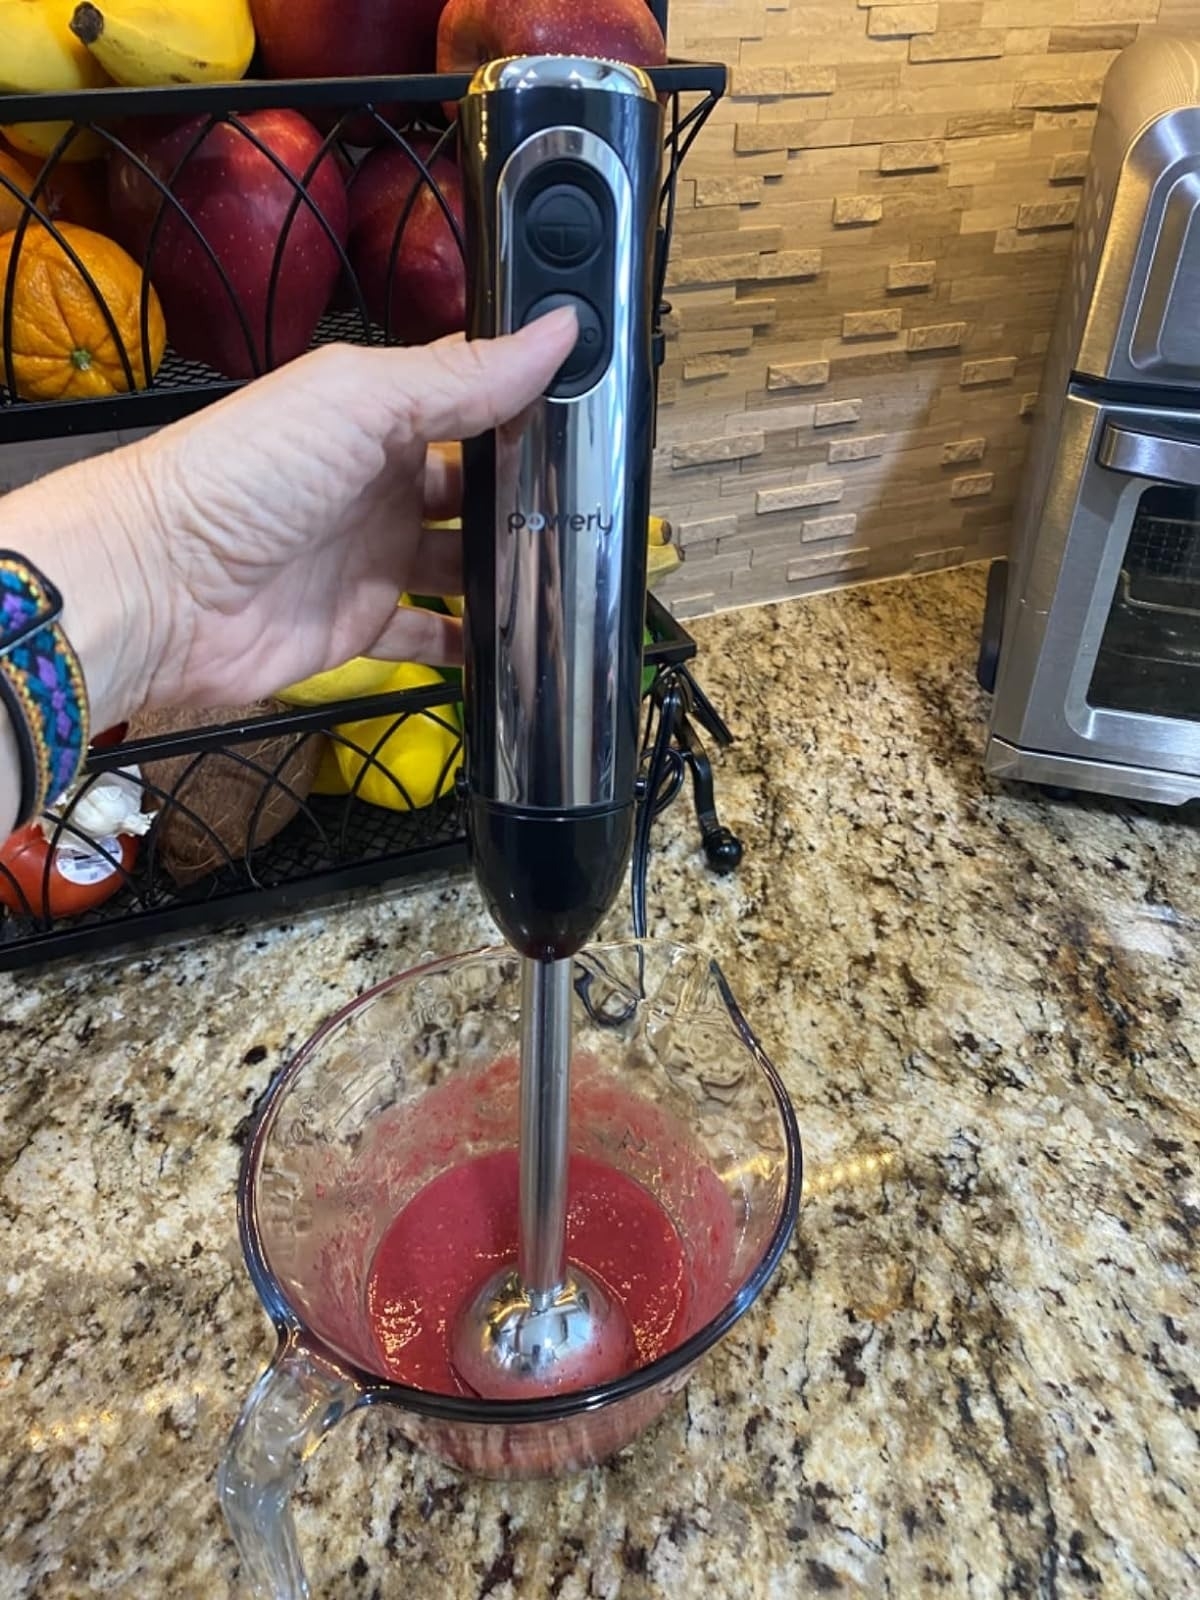 Person using a handheld immersion blender to mix ingredients in a glass bowl on a kitchen counter